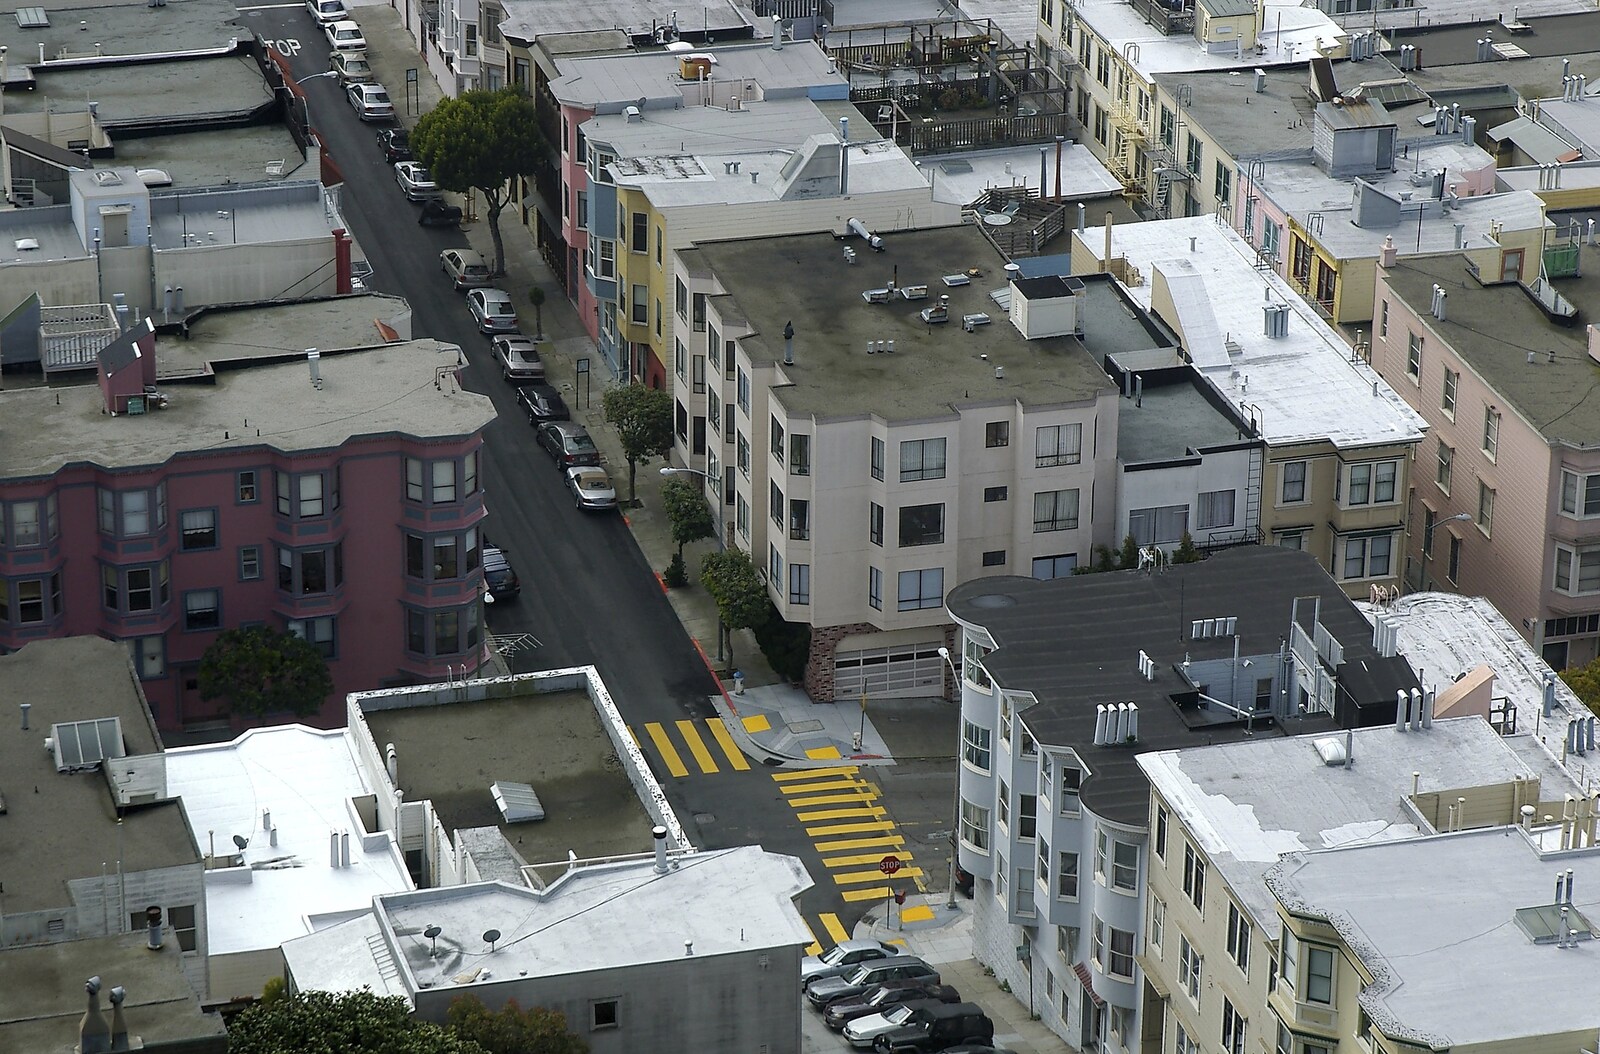 Looking down from Coit Tower from Chinatown, Telegraph Hill and Fisherman's Wharf, San Francisco, California, US - 11th March 2006